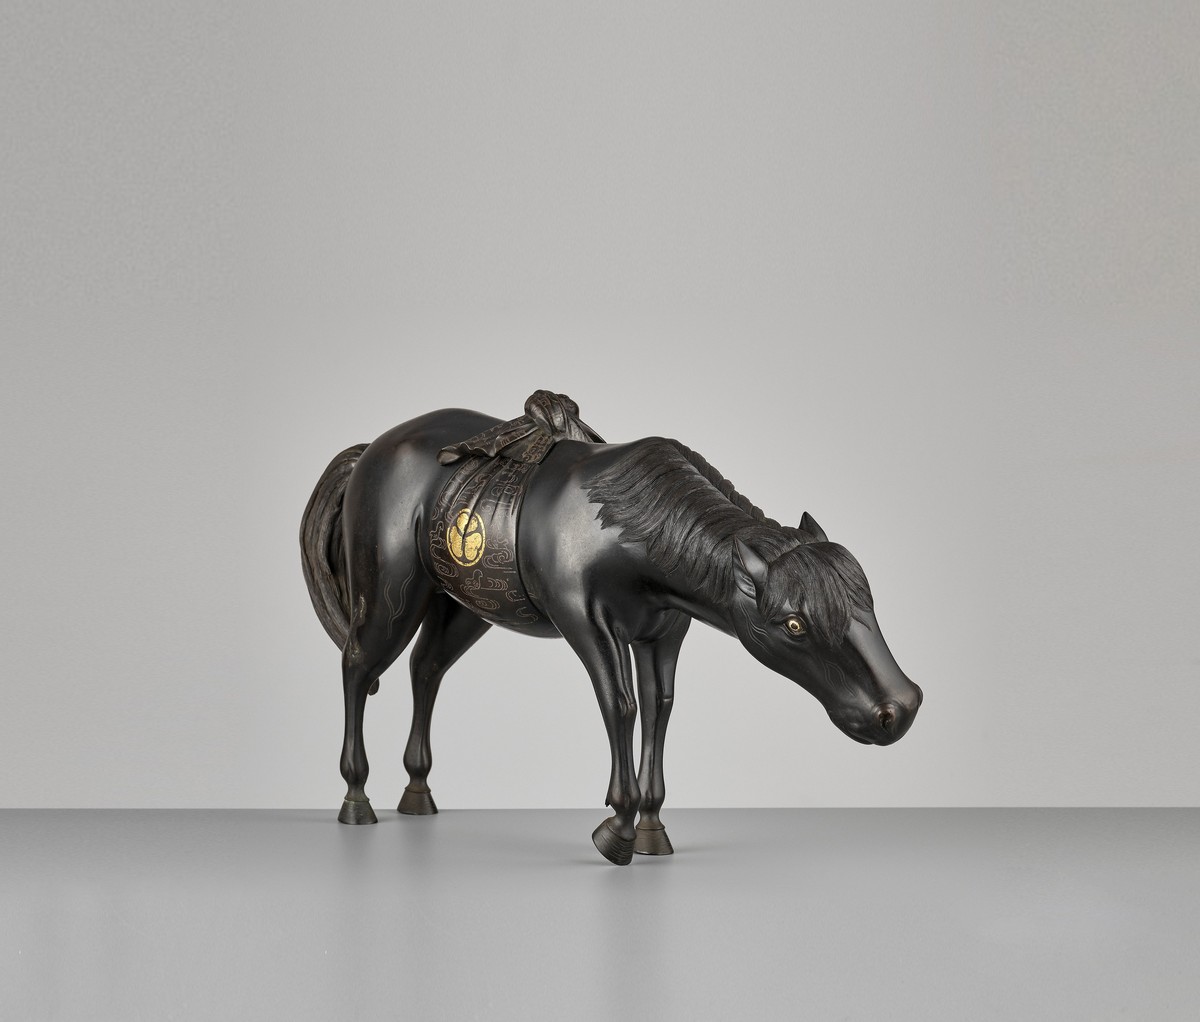 A VERY HEAVY SILVER AND GOLD-INLAID ‘HORSE’ CENSER Japan, 1750-1850, Edo period (1615-1868)The horse